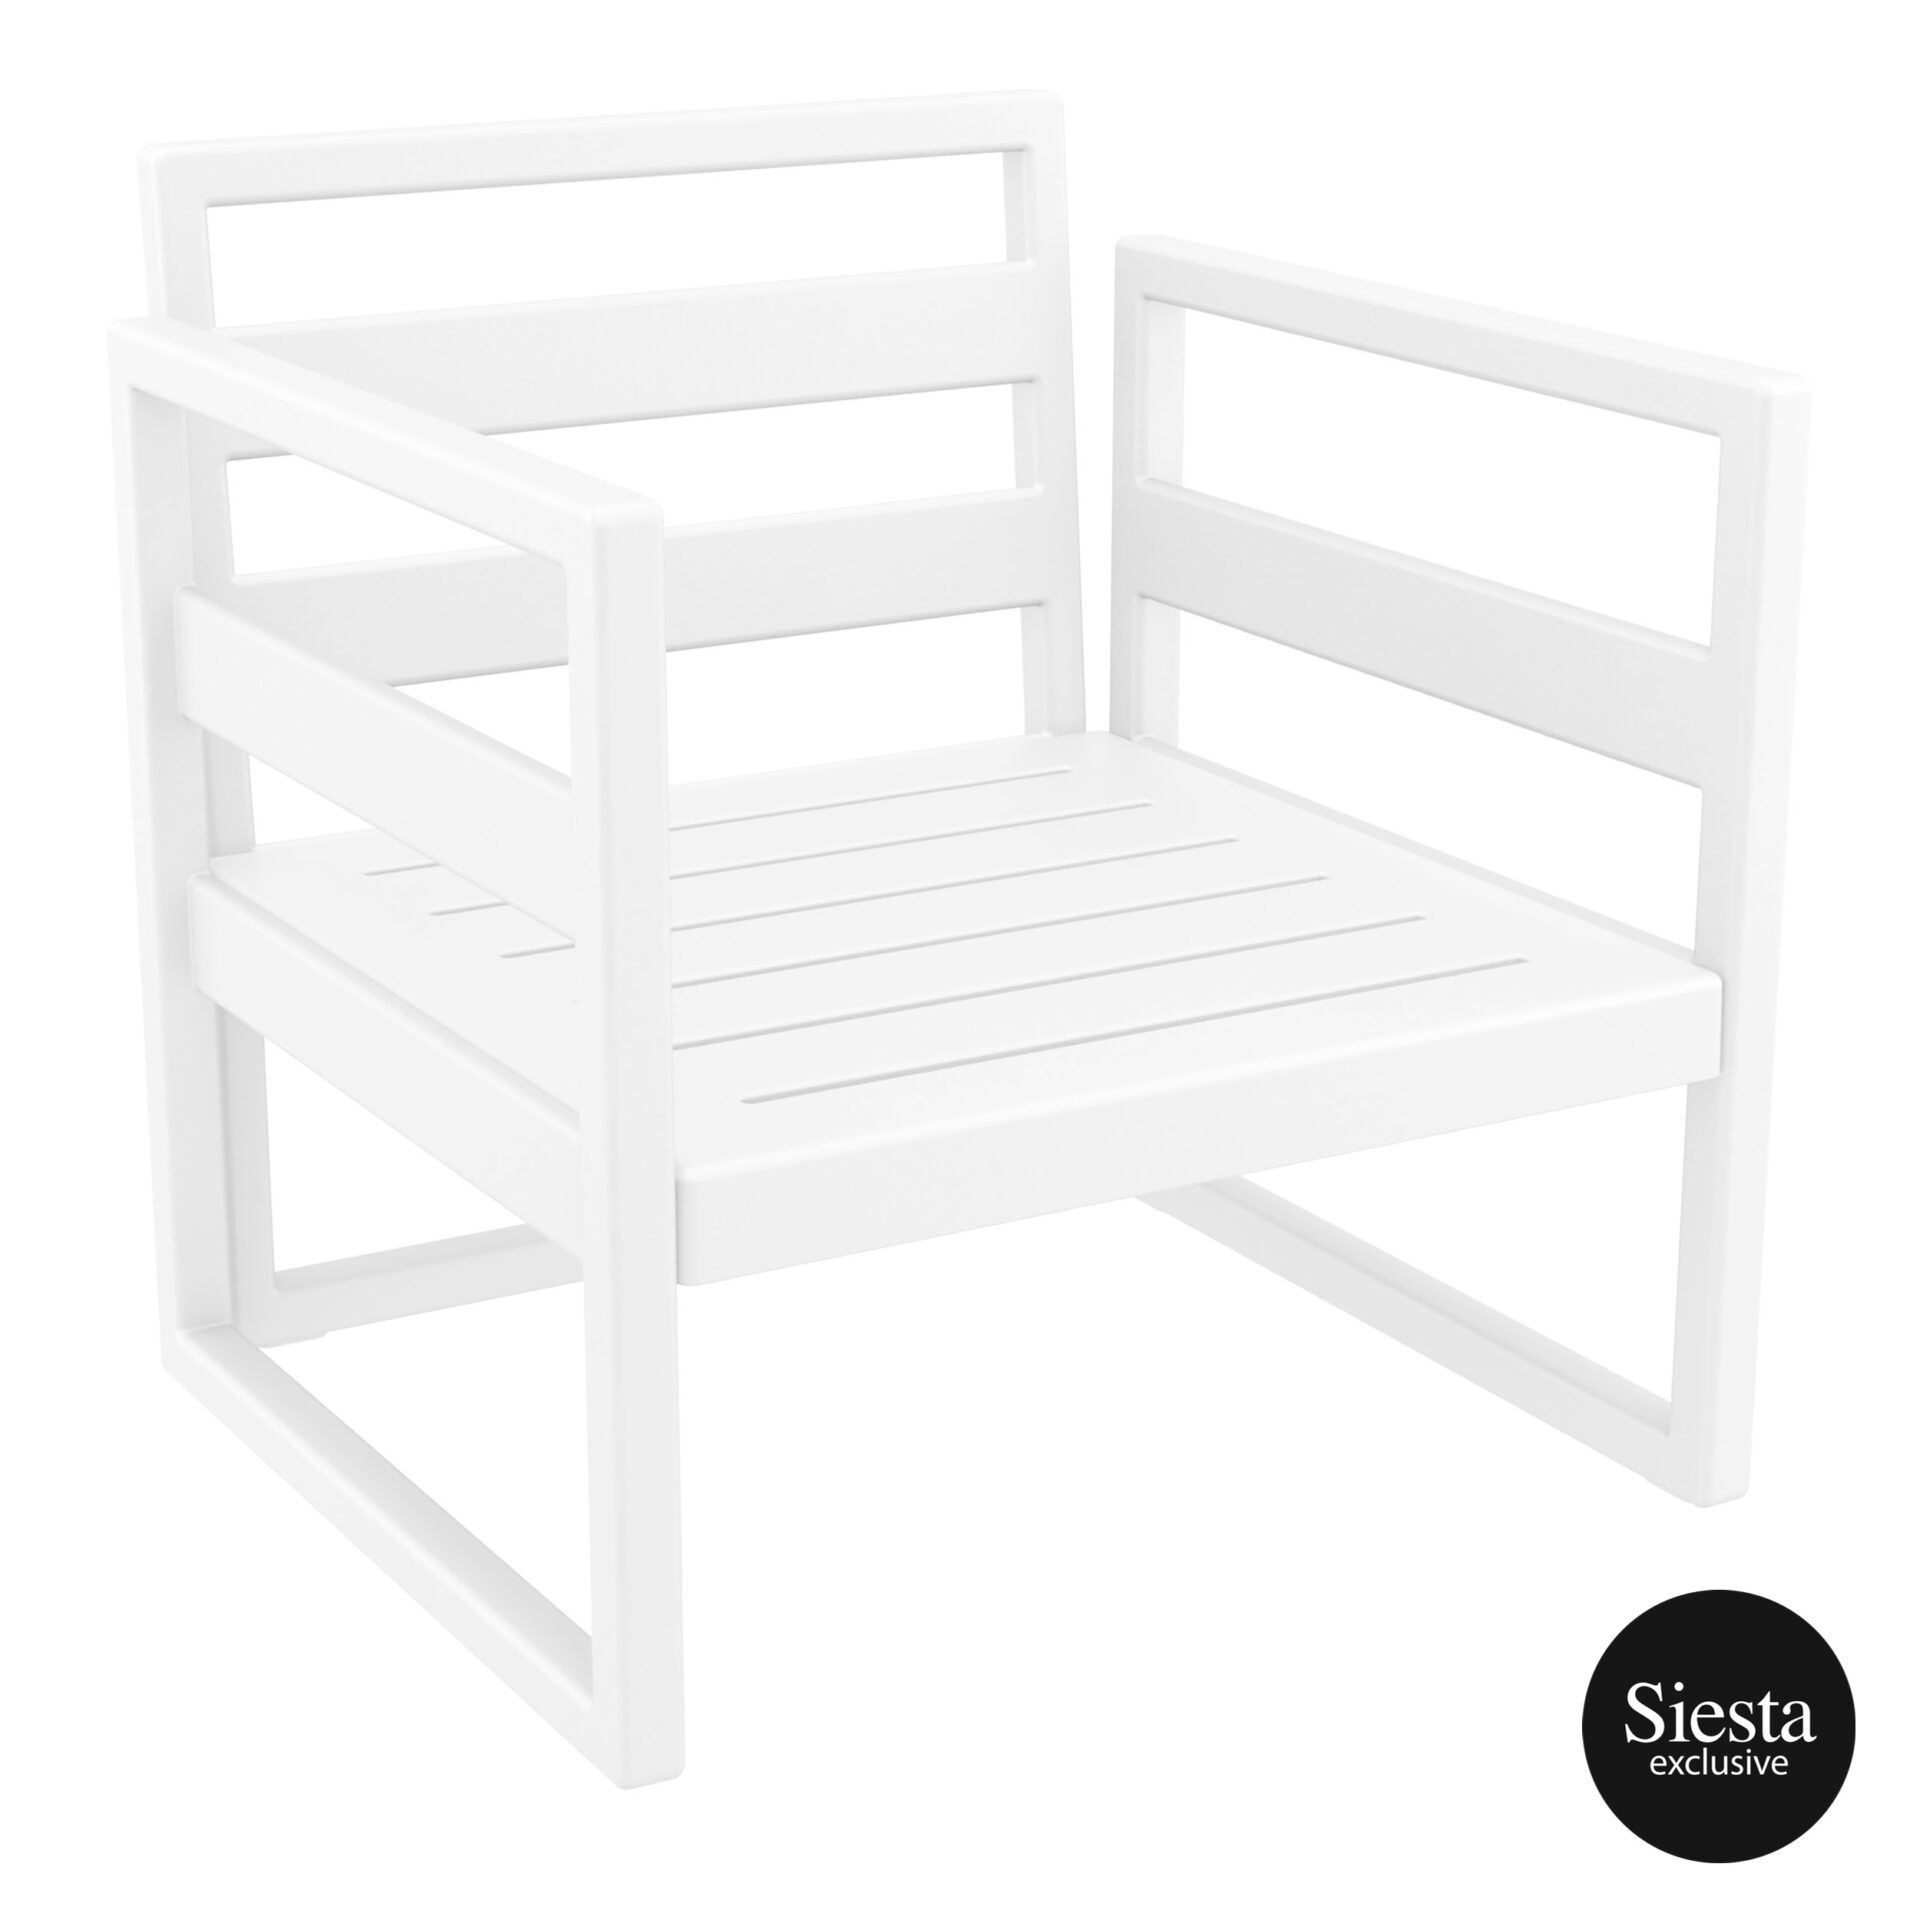 Mykonos Outdoor Lounge Armchair colour WHITE available to order now!